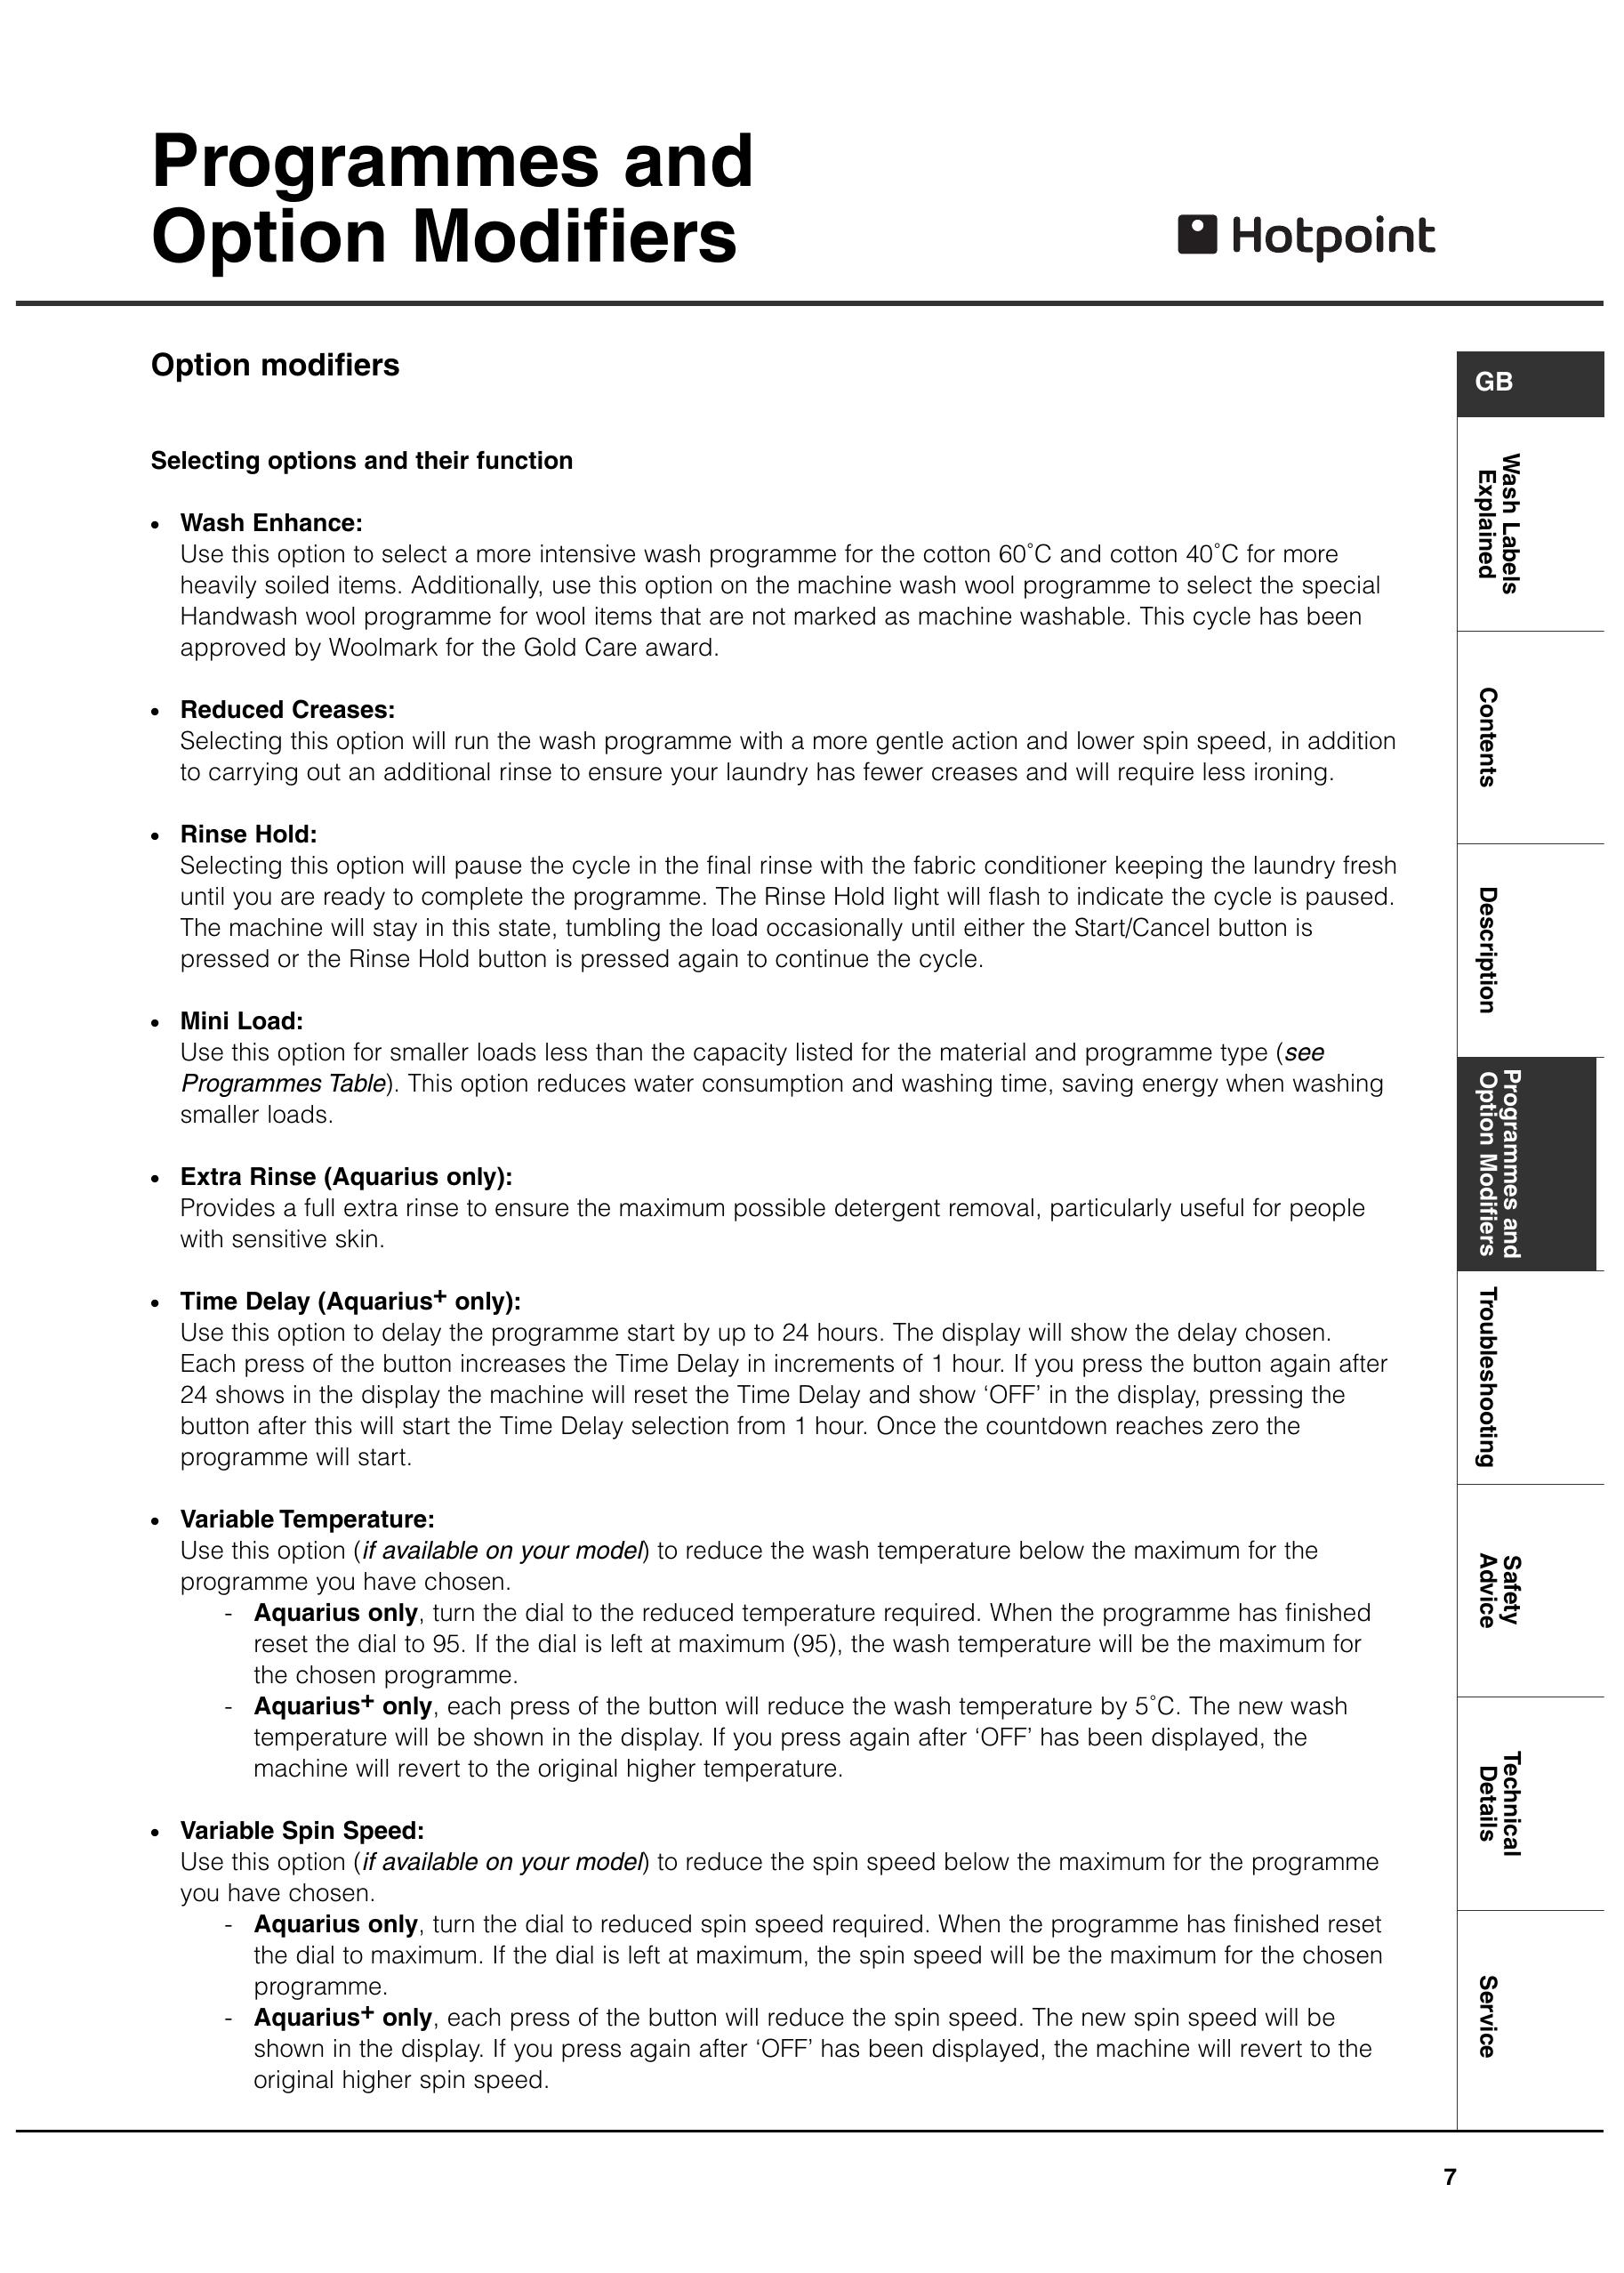 Hotpoint Aquarius+ Clothes Dryer User Manual (Page 7)